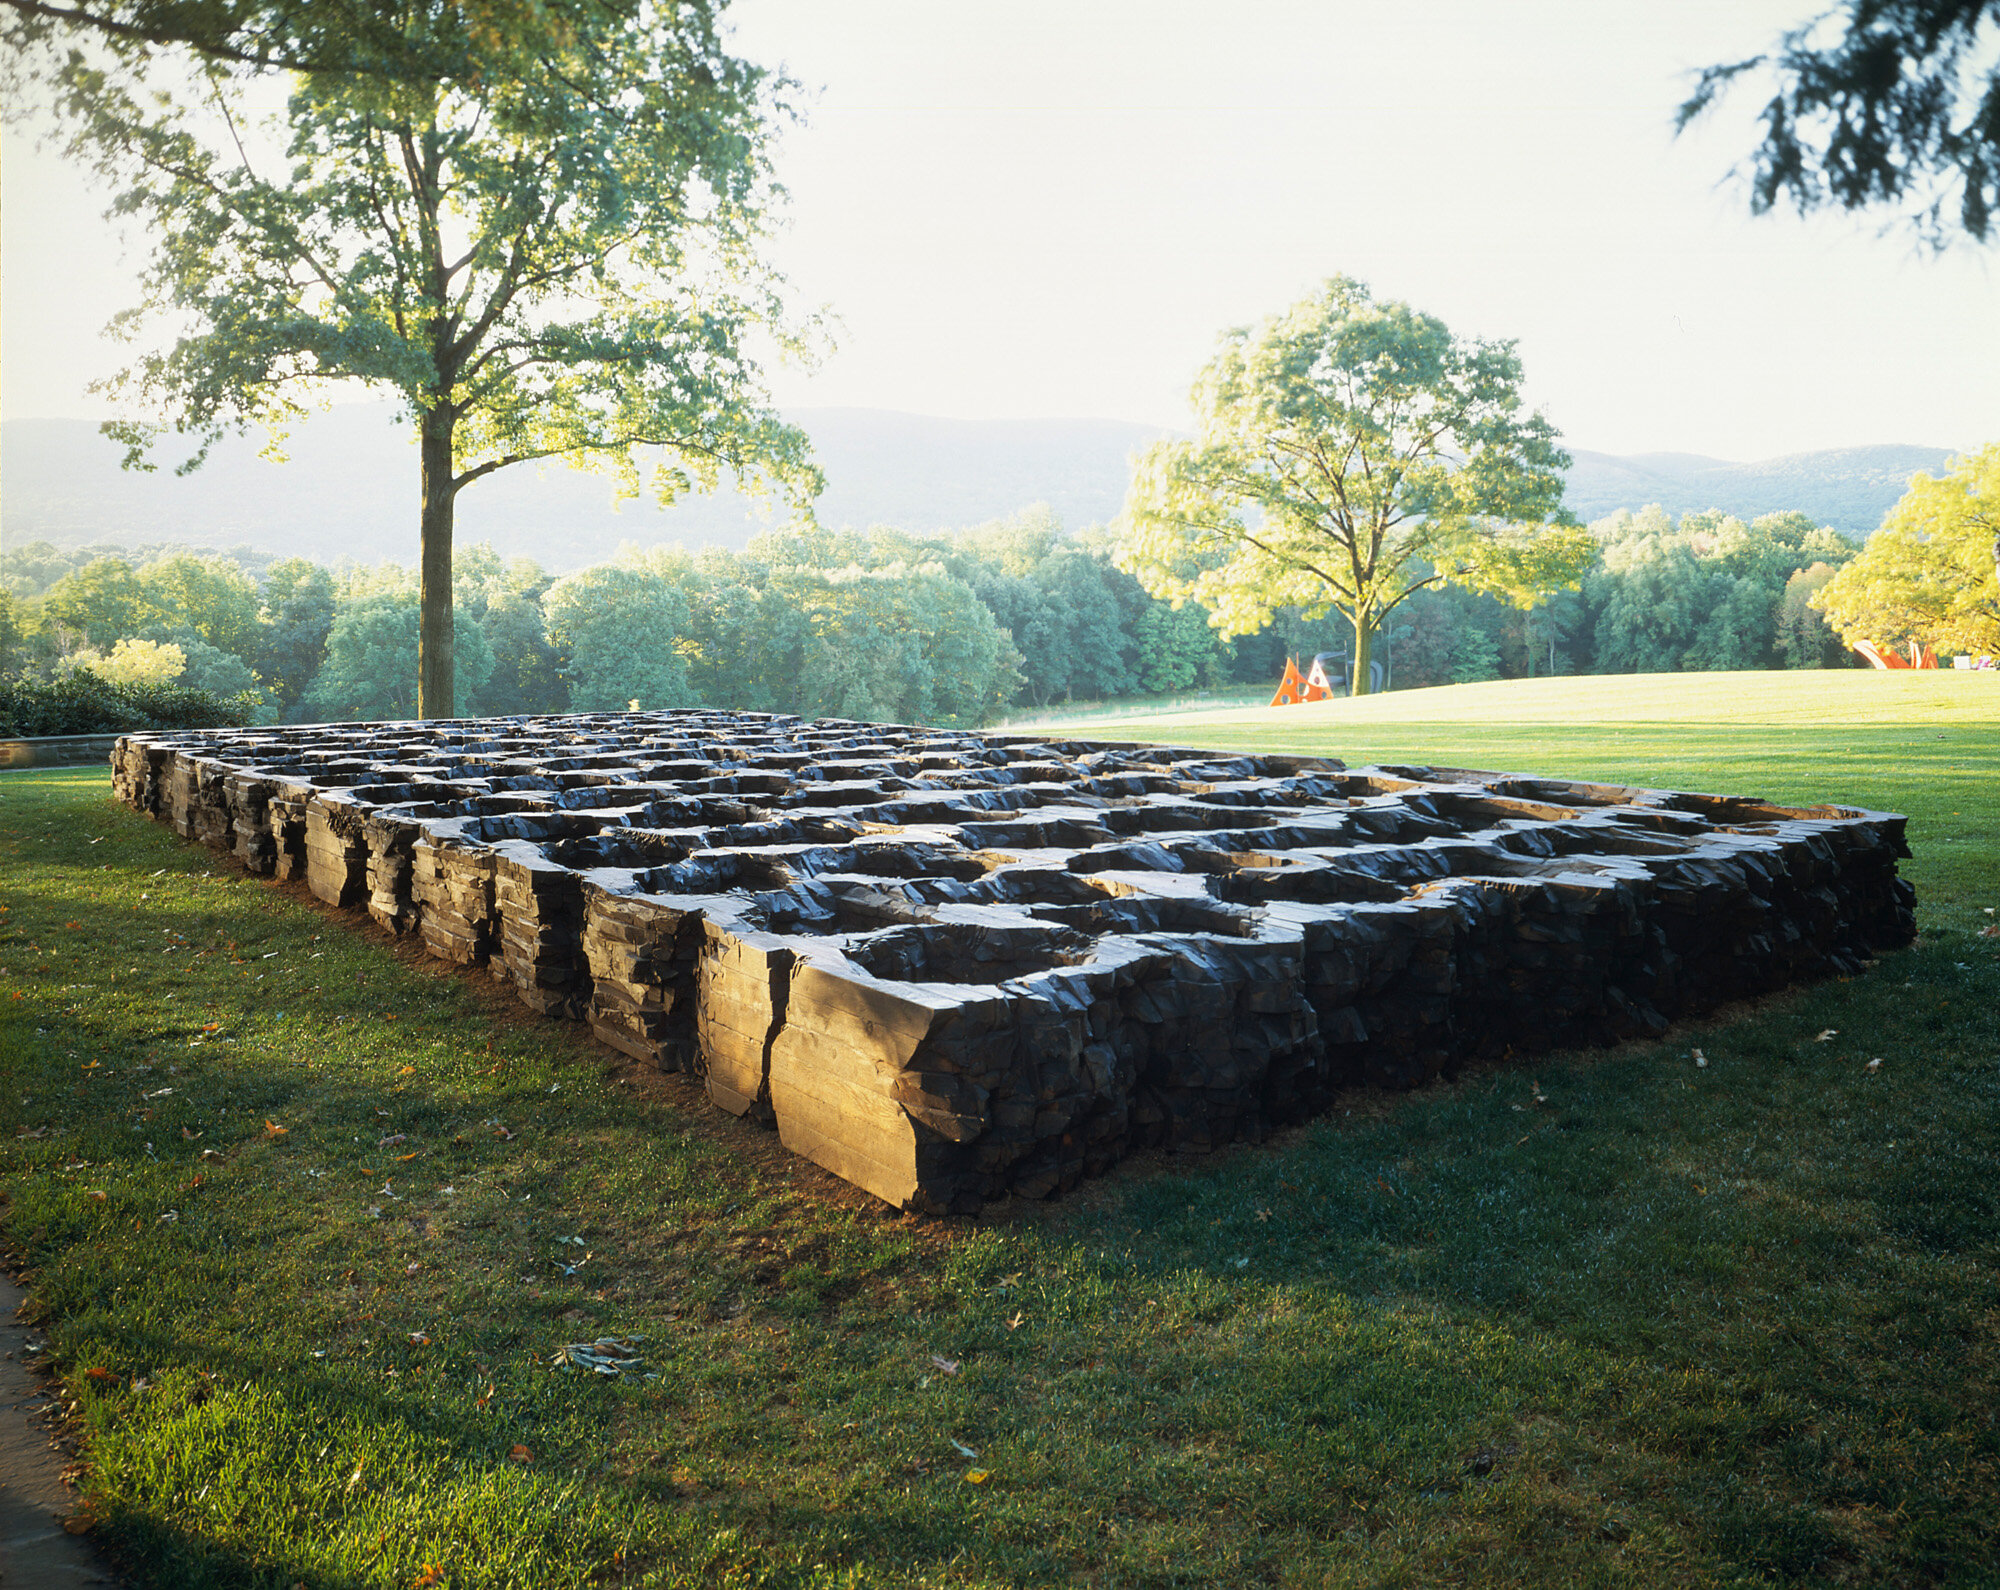       Ene Due Rabe , 1990 Cedar and graphite 22 x 523.5 x 209 in.    Storm King Art Center  